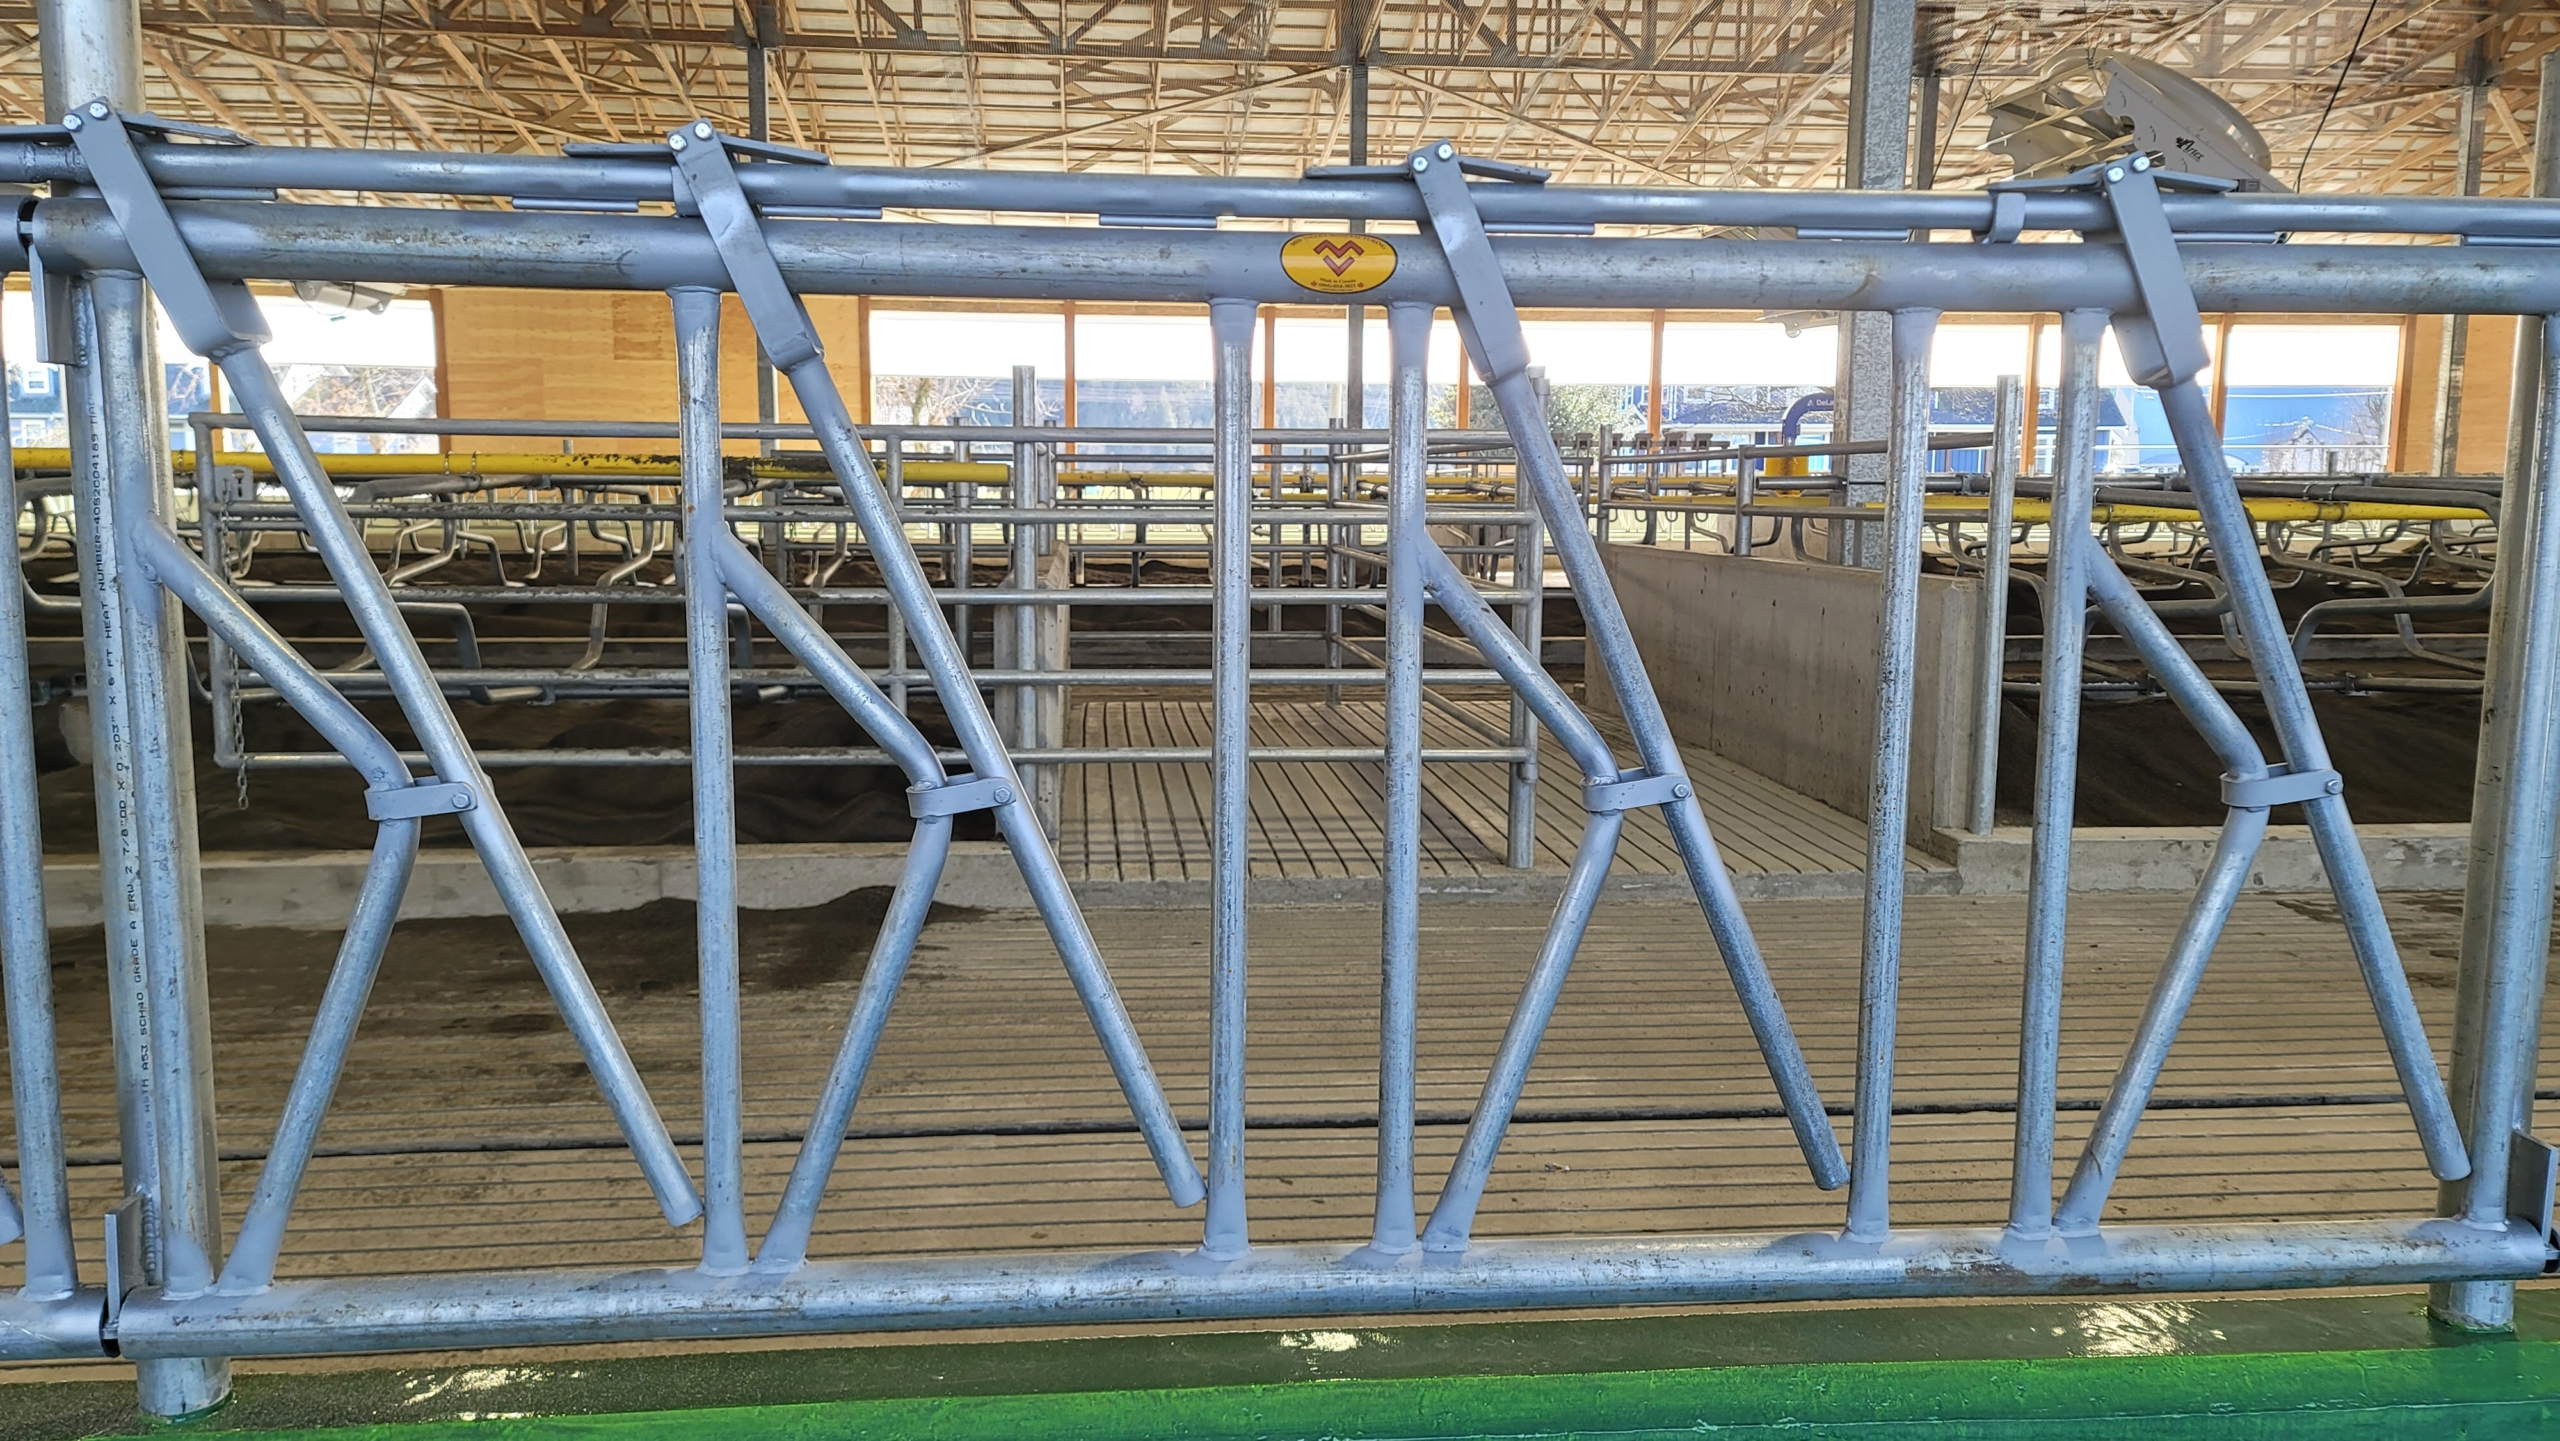 Dairy cow stanchions with Mid Valley Manufacturing logo.